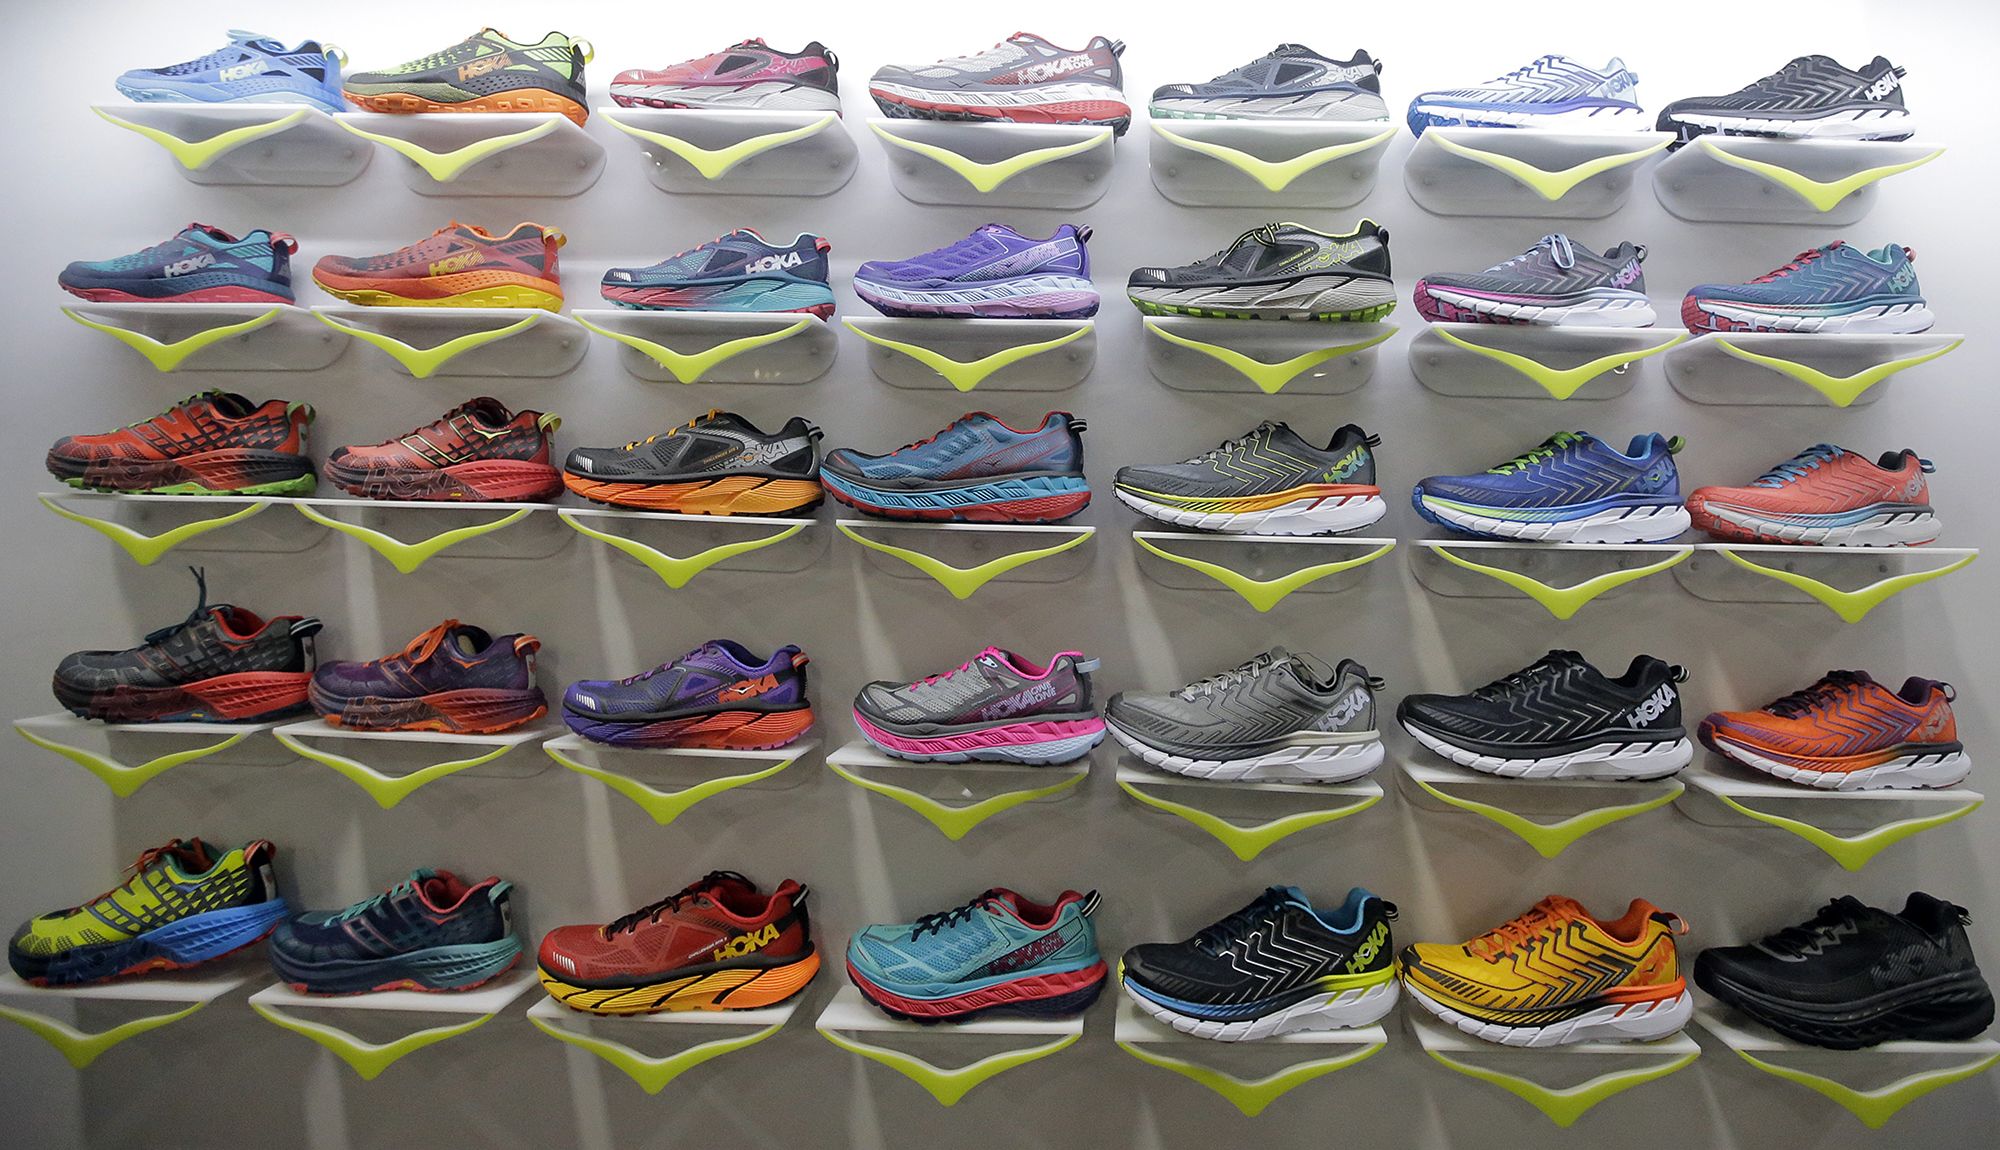 Sneaker Walls at Shopping Malls Could Look a Lot Different in 2023